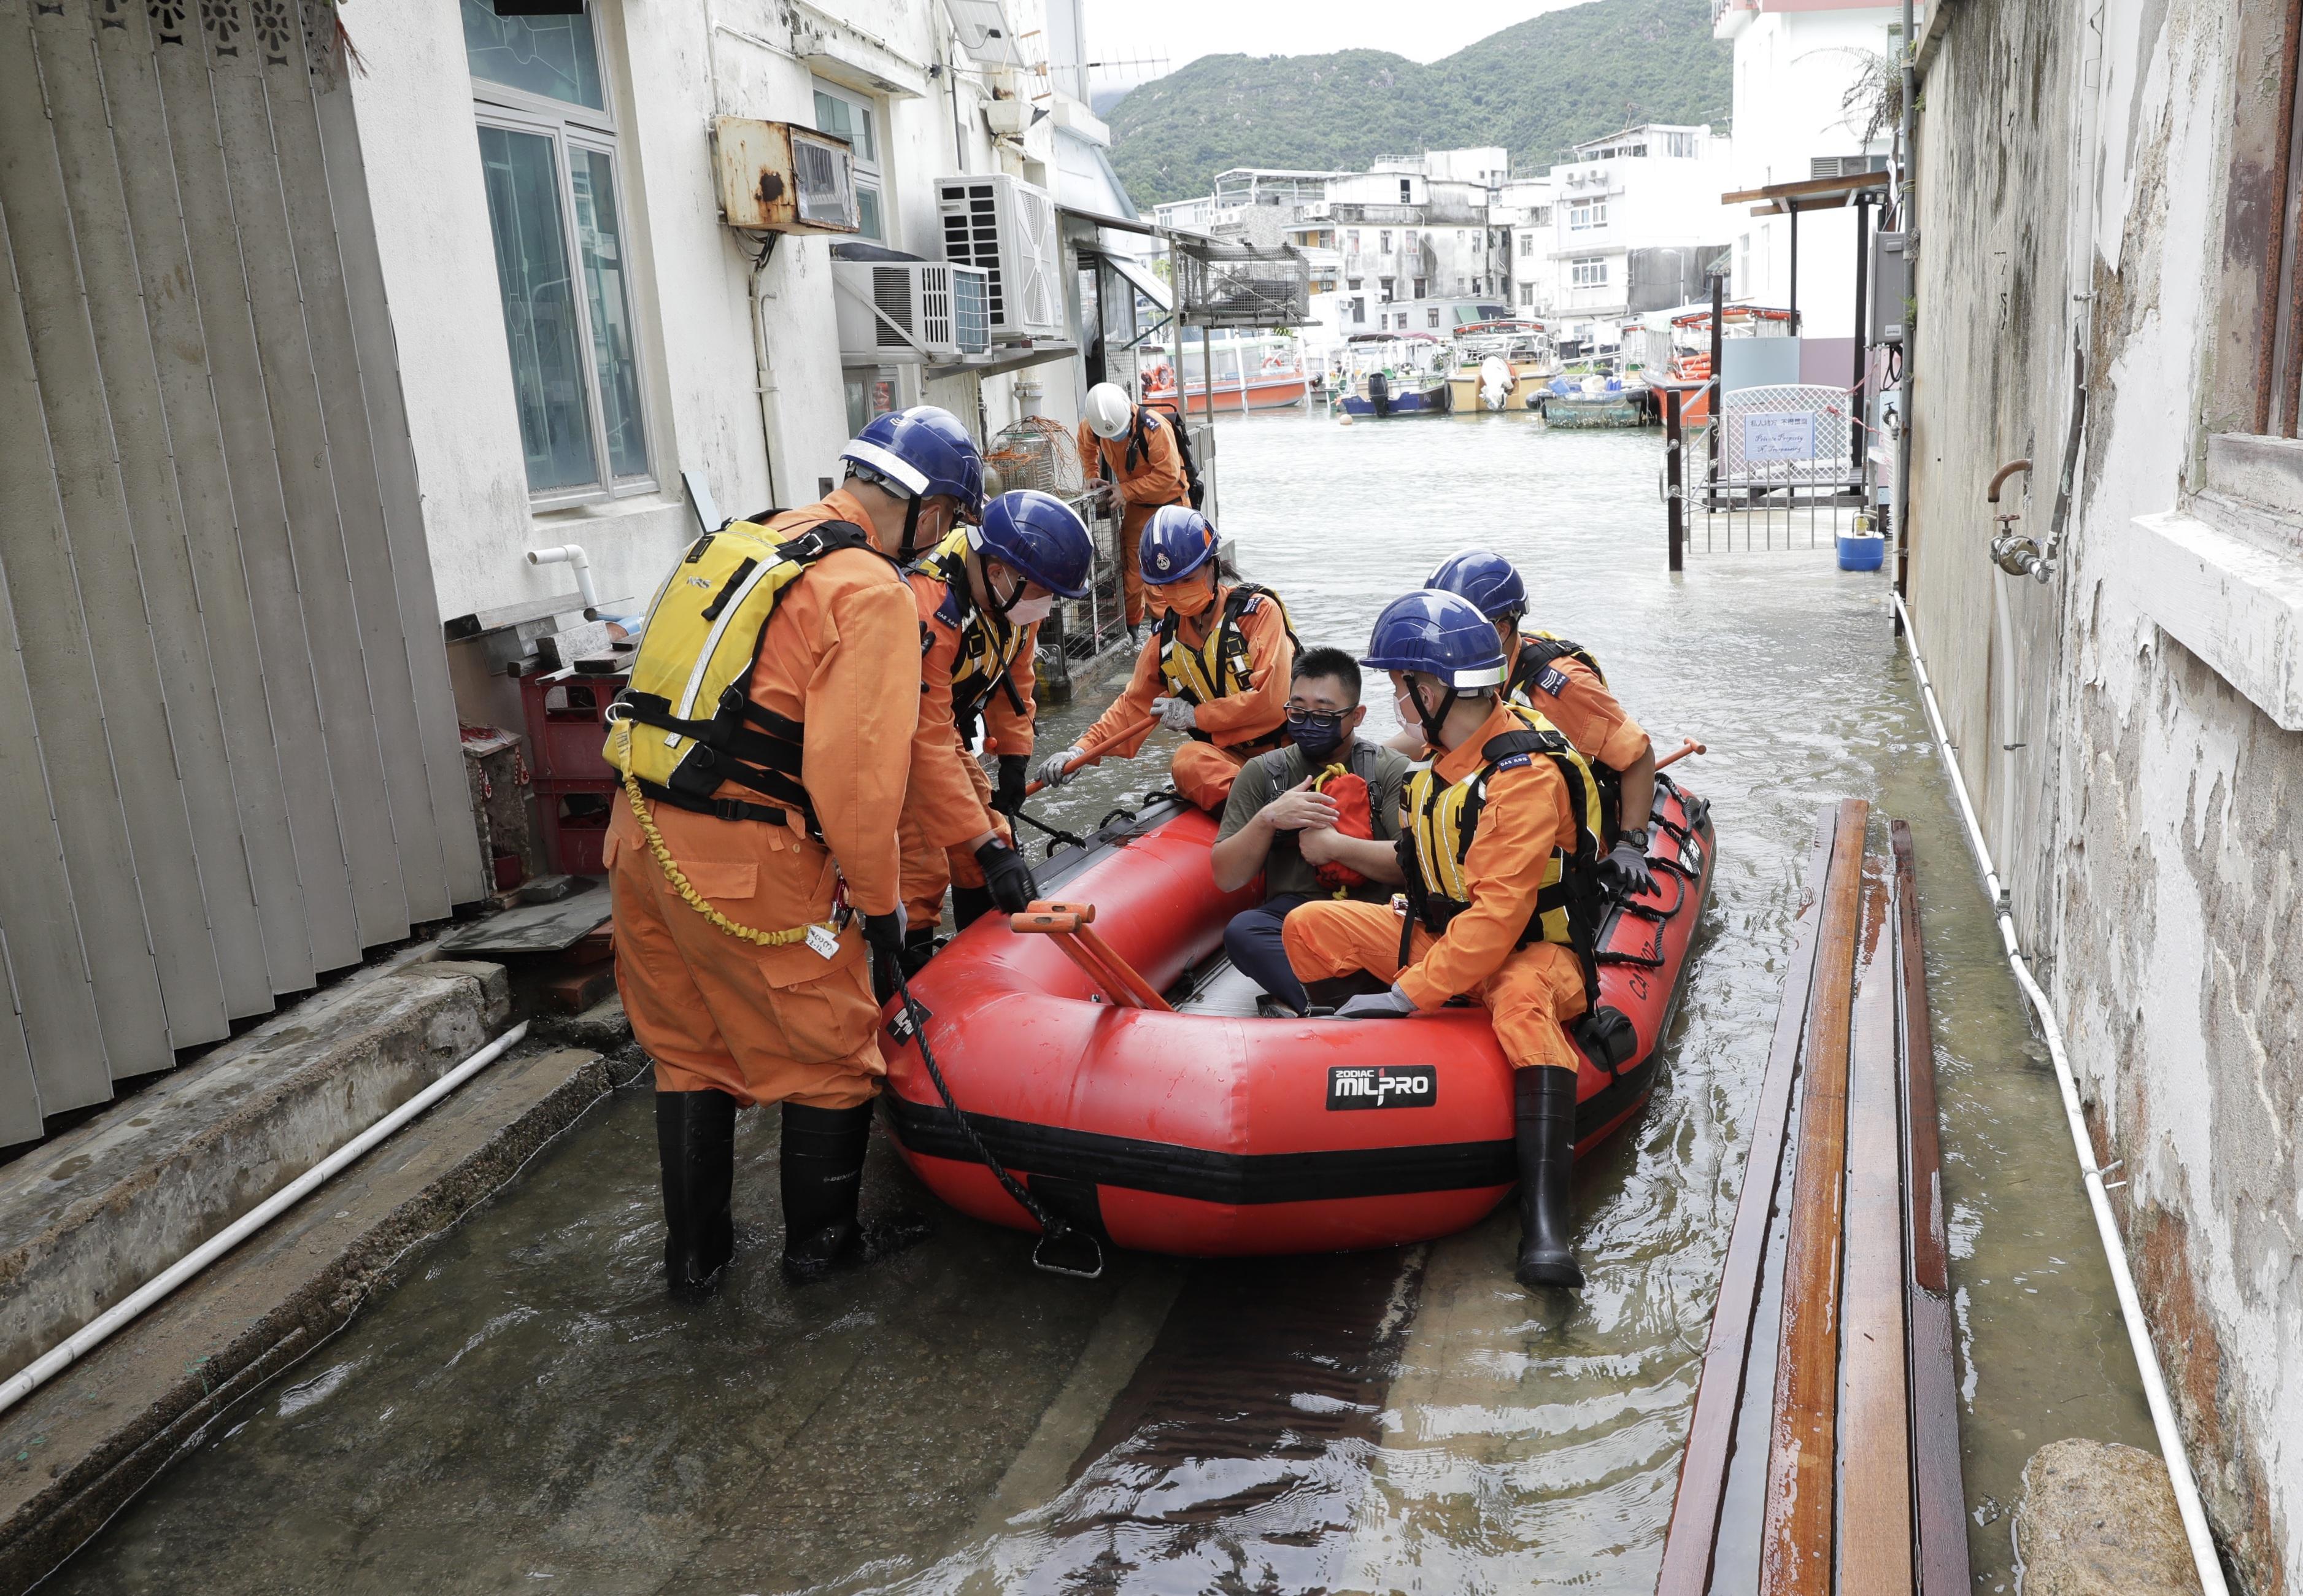 The Islands District Office conducted an inter-departmental rescue and evacuation drill on emergency response to flooding in Tai O today (June 16). Photo shows Civil Aid Service members rescuing a trapped resident by boat during the drill.